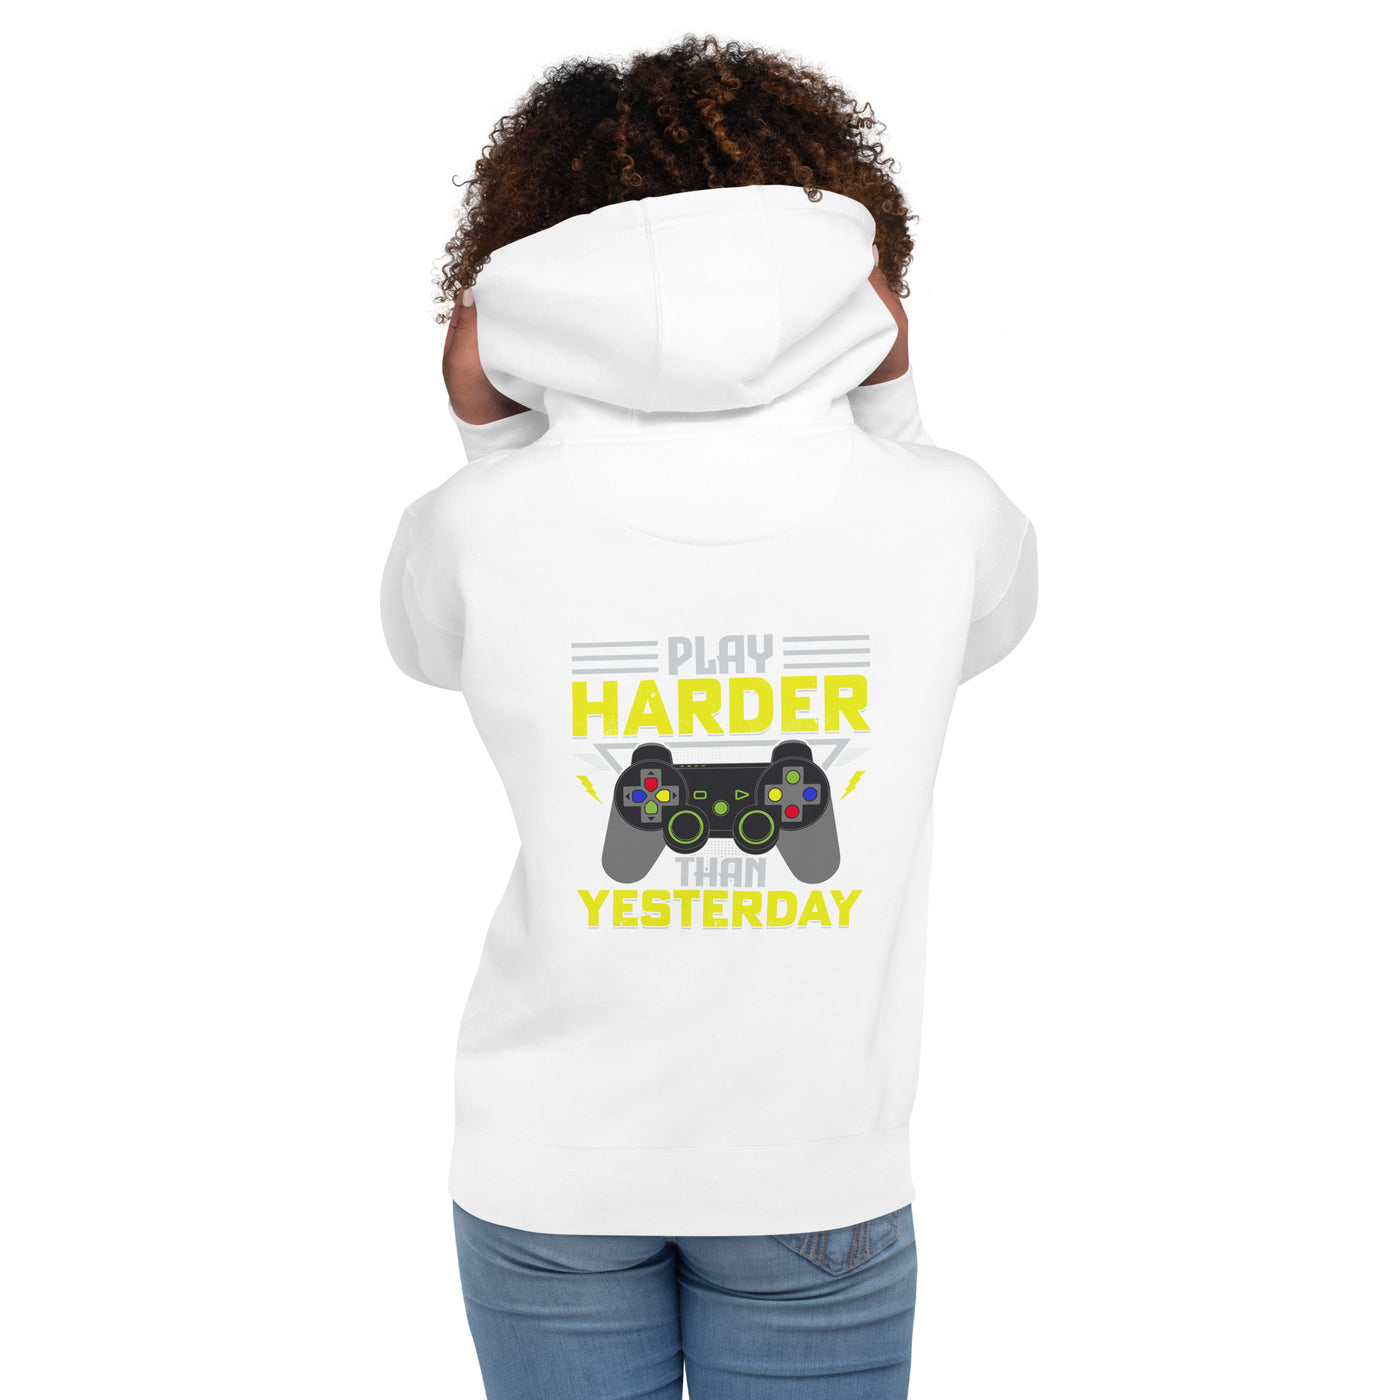 Play harder than Yesterday - Unisex Hoodie ( Back Print )